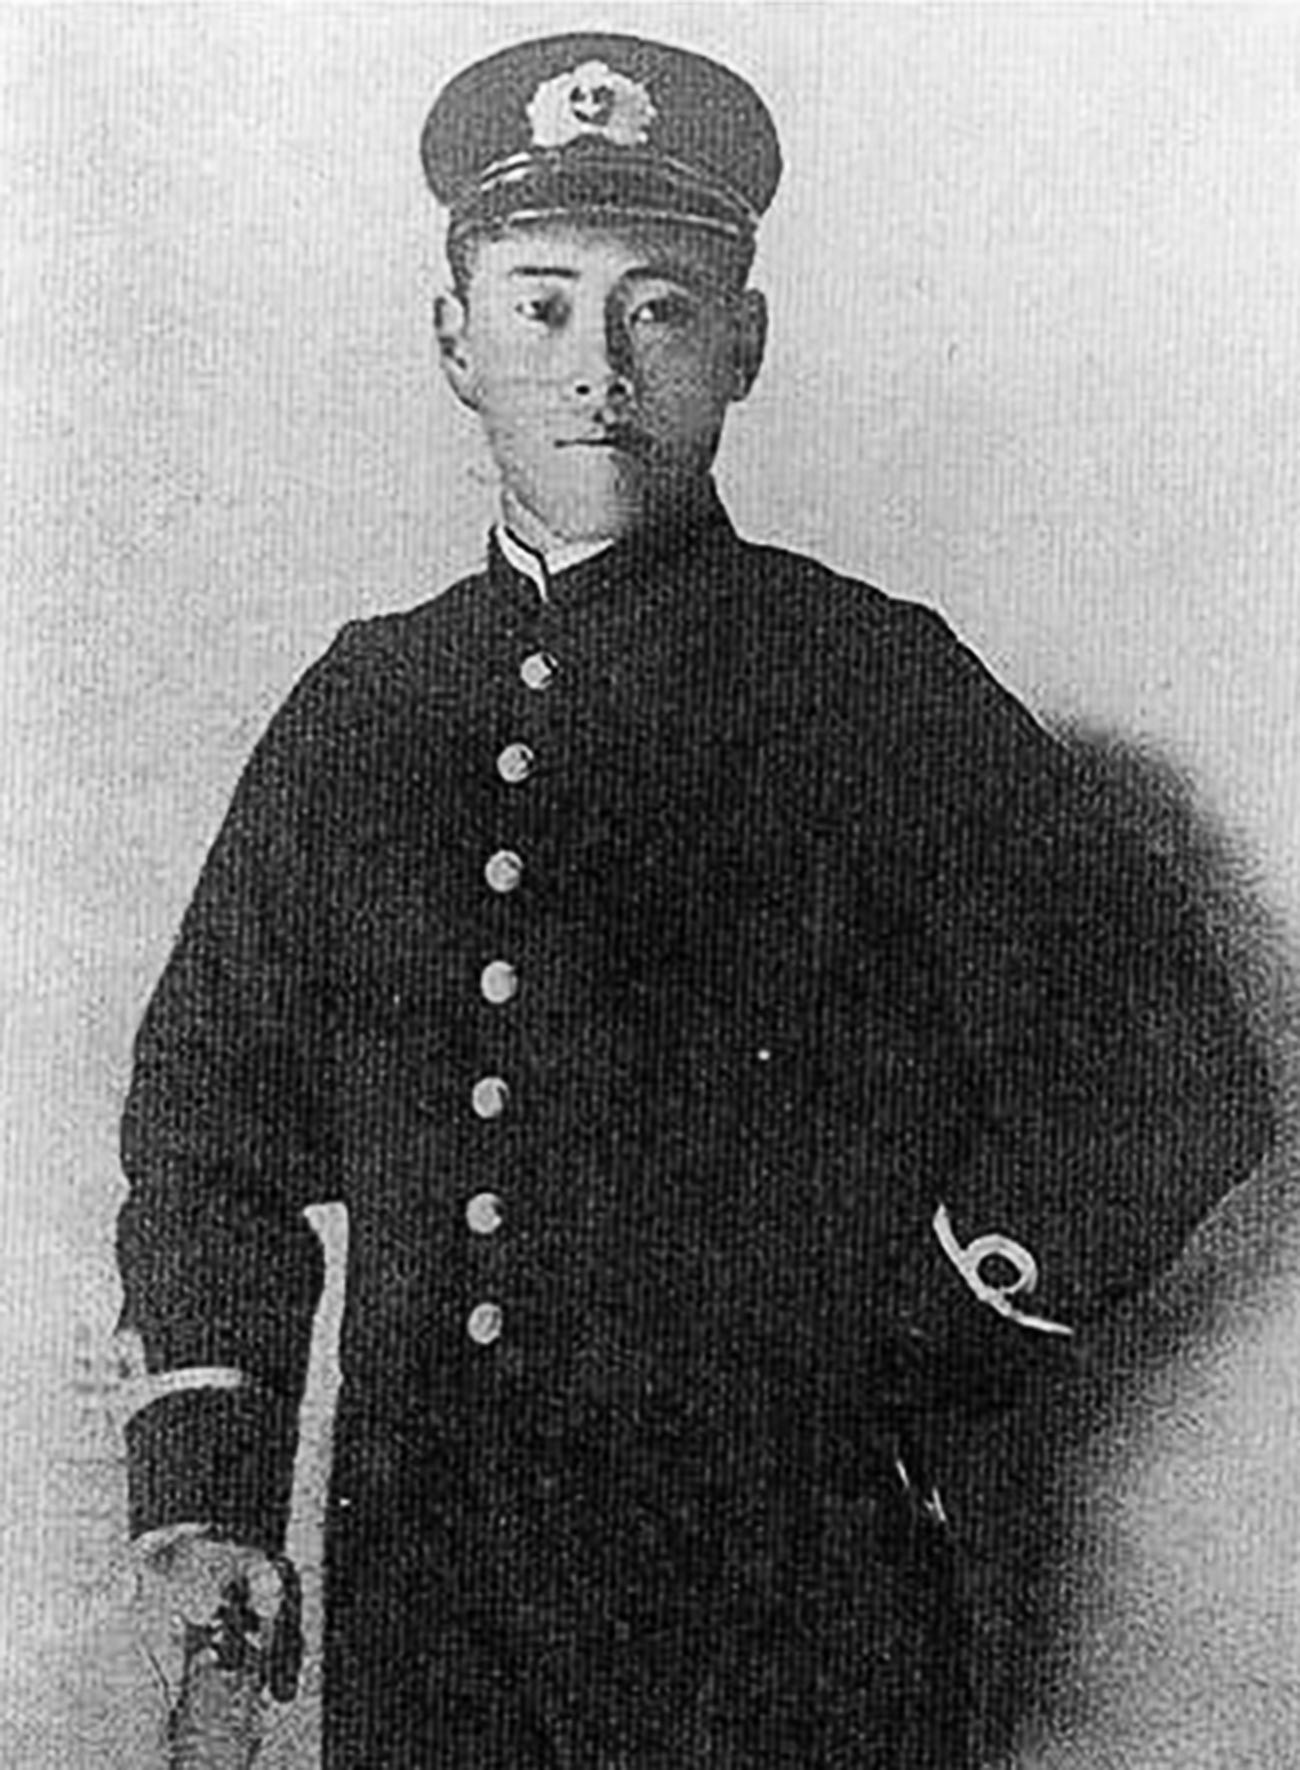 Isoroku Yamamoto in 1905 just before going into action during the Russo-Japanese War.